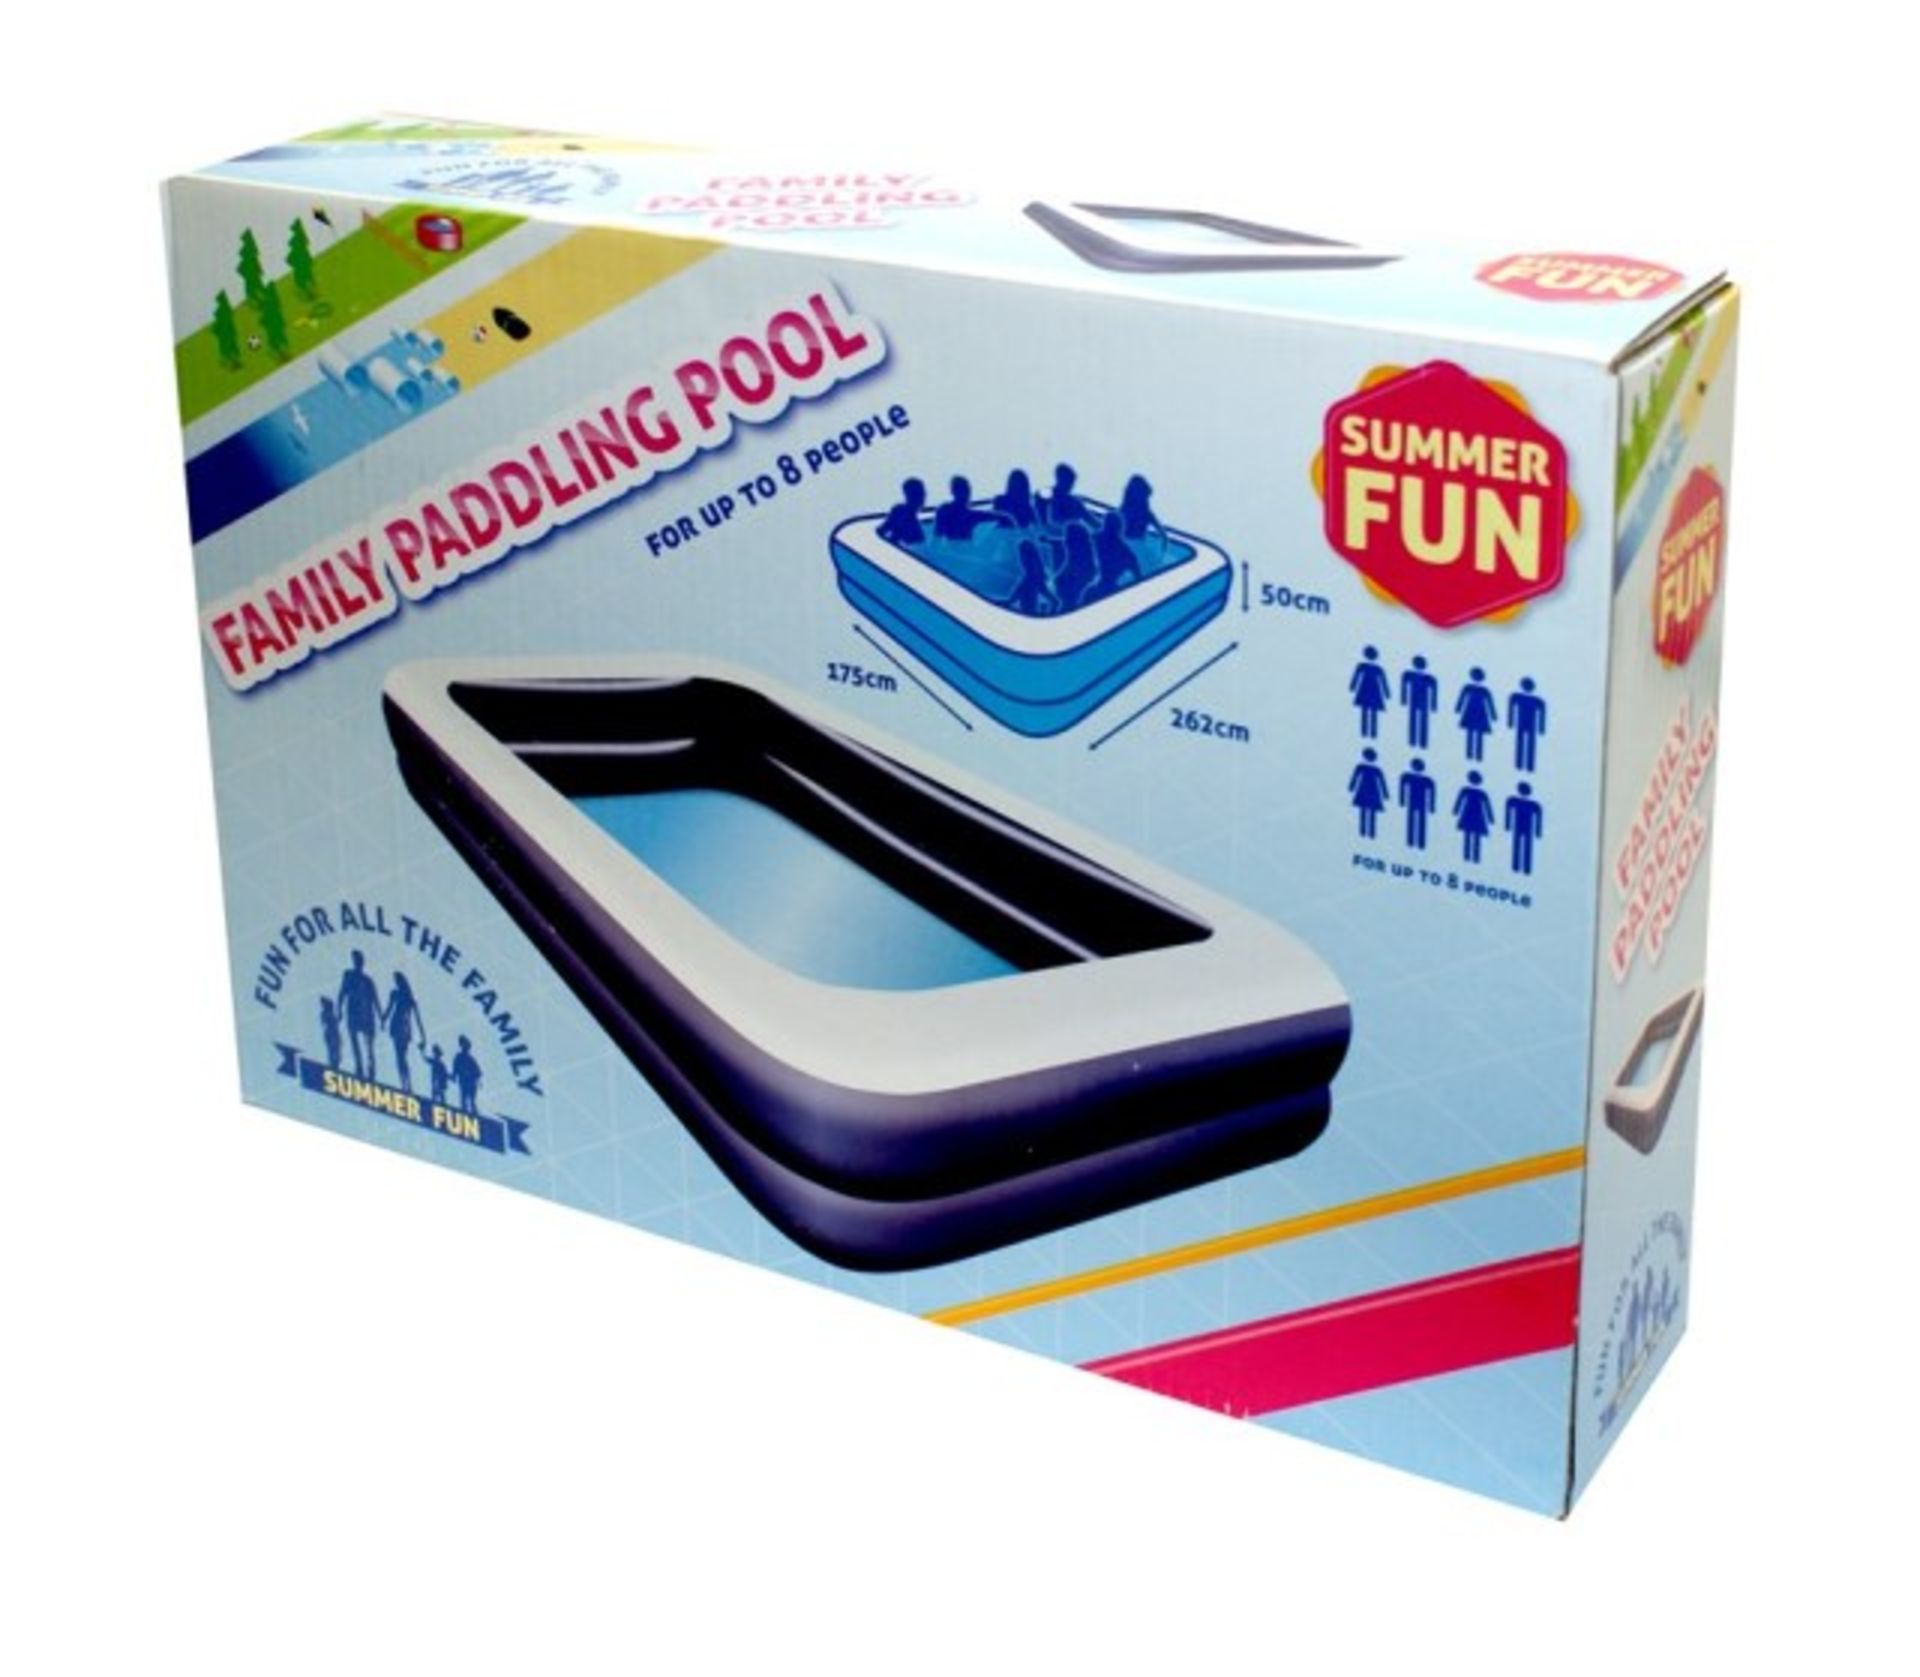 V *TRADE QTY* Brand New Family Paddling Pool 175x262x50cm X 4 YOUR BID PRICE TO BE MULTIPLIED BY - Image 2 of 2